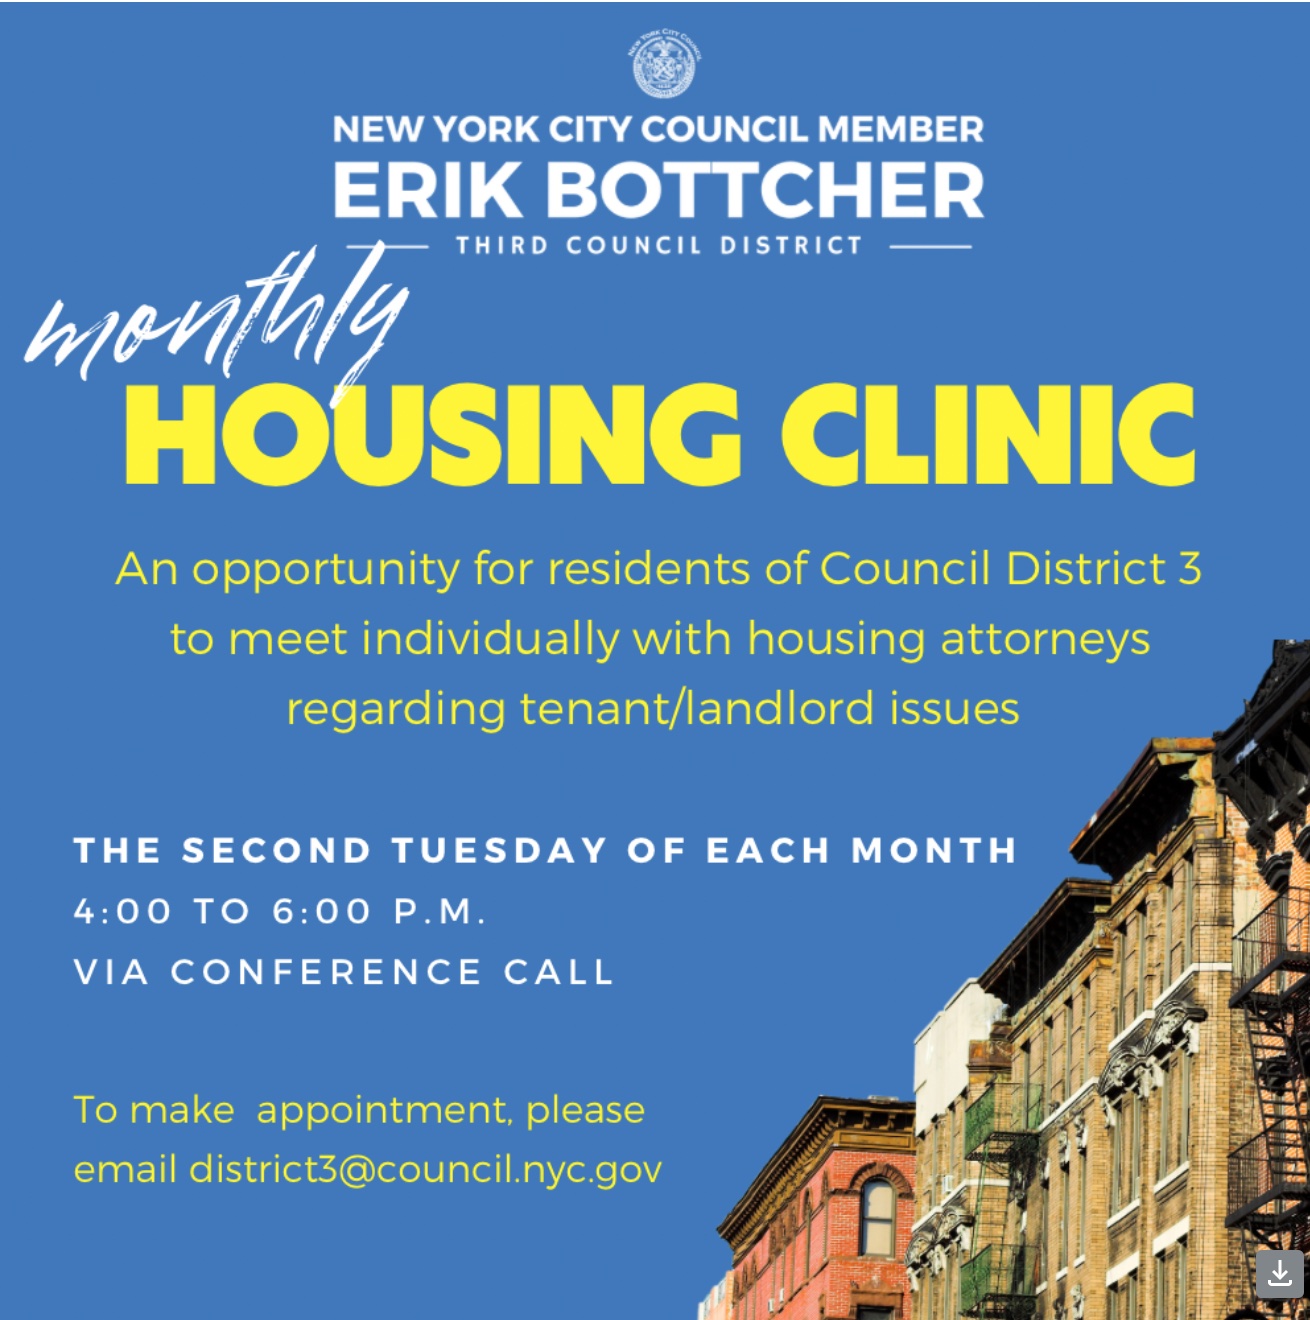 Flyer for Monthly Housing Clinic Features Building and text: Monthly Housing Clinic Sign-Up   Sign-up below for Council Member Erik Bottcher's Monthly Housing Clinic. The clinic will always operate VIRTUALLY on the second Tuesday of each month. All conversations are confidential.   NEXT CLINIC  Tuesday, May 14  4:00PM - 6:00PM